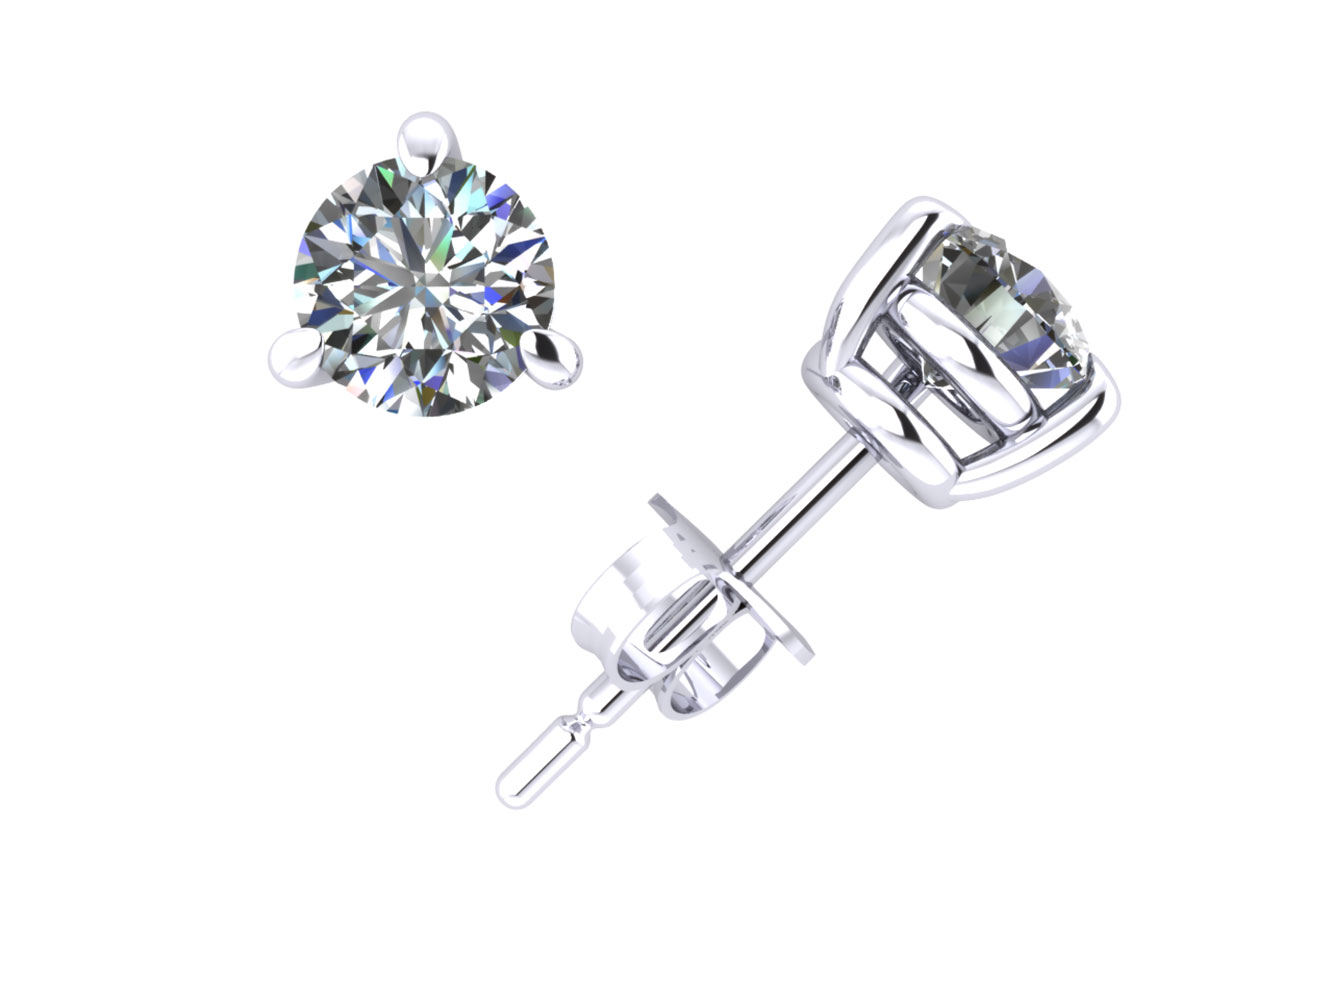 Jewel We Sell 0.75Ct Round Diamond Basket Solitaire Stud Earrings 18k White or Yellow Gold 3Prong F VS2